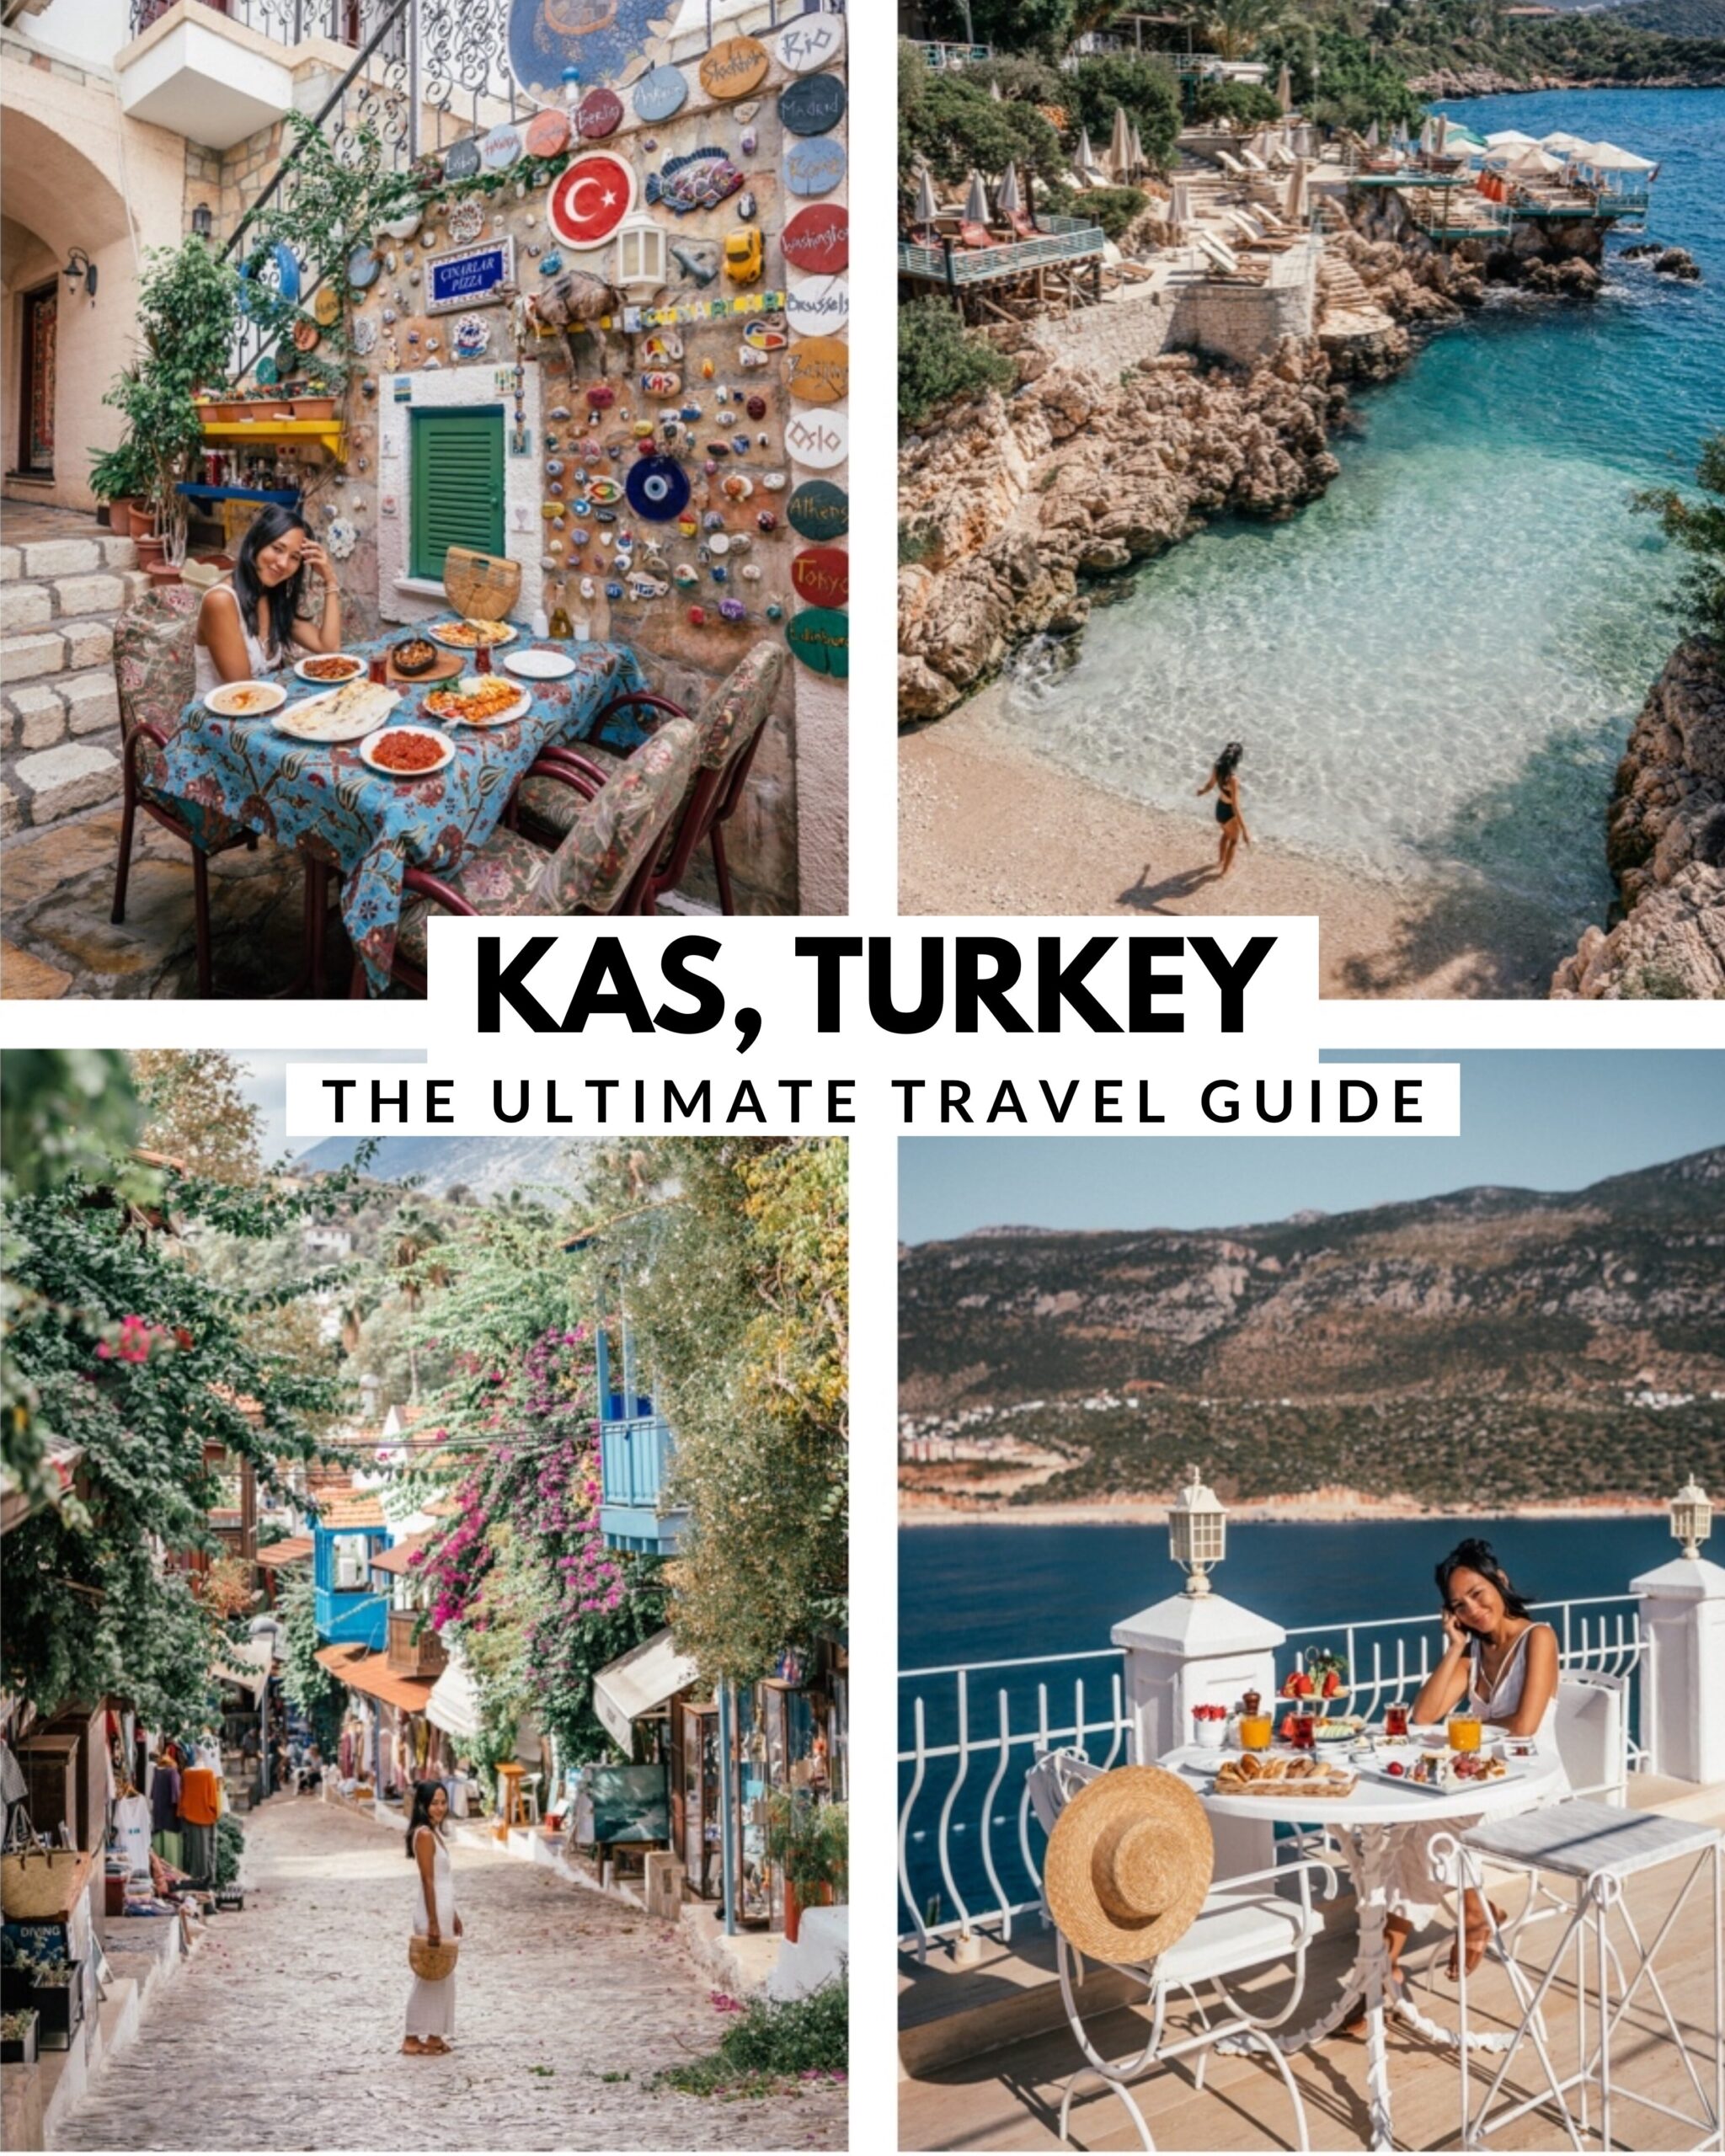 Travel guide to Kas, Turkey including the best beaches, Old Towns, day trips, restaurants, hotels and more.